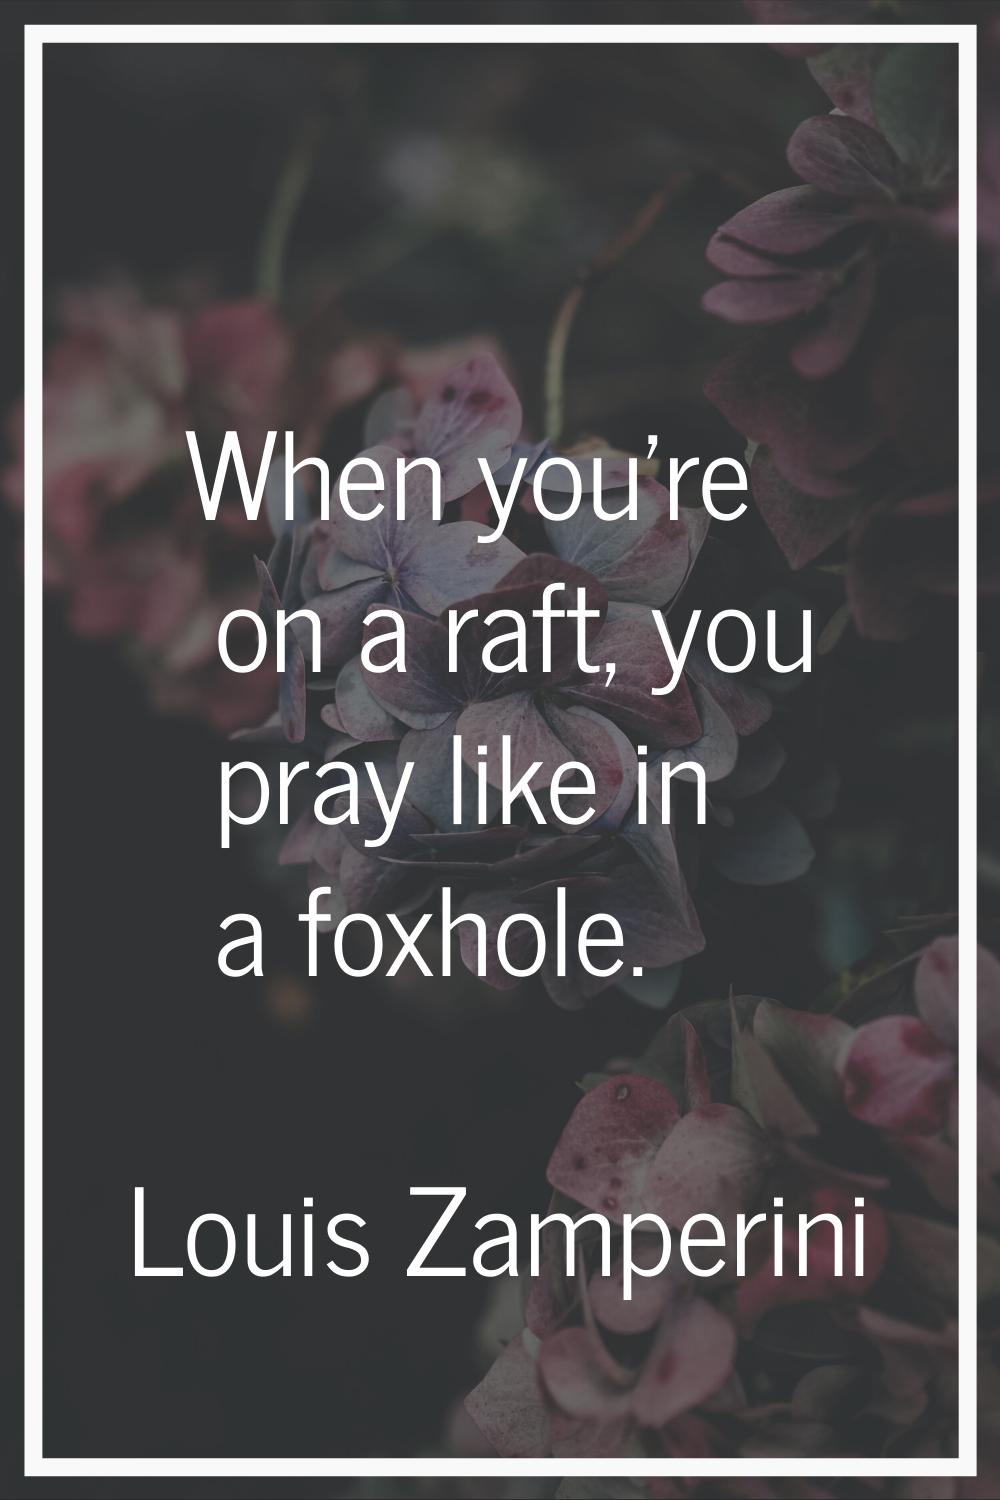 When you're on a raft, you pray like in a foxhole.